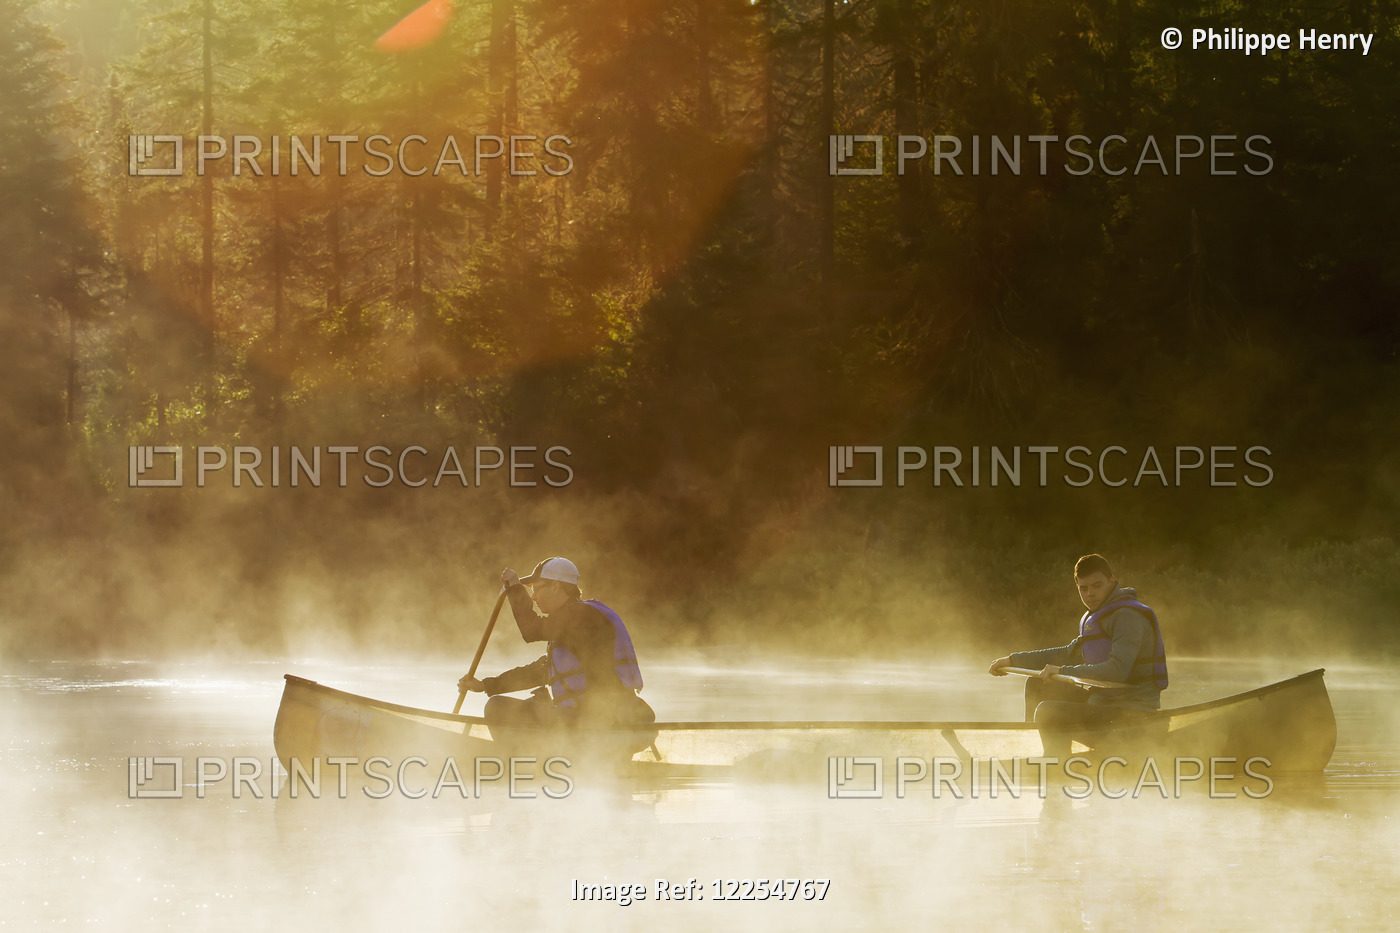 People Canoeing On A Lake At Dawn In La Mauricie National Park; Quebec, Canada